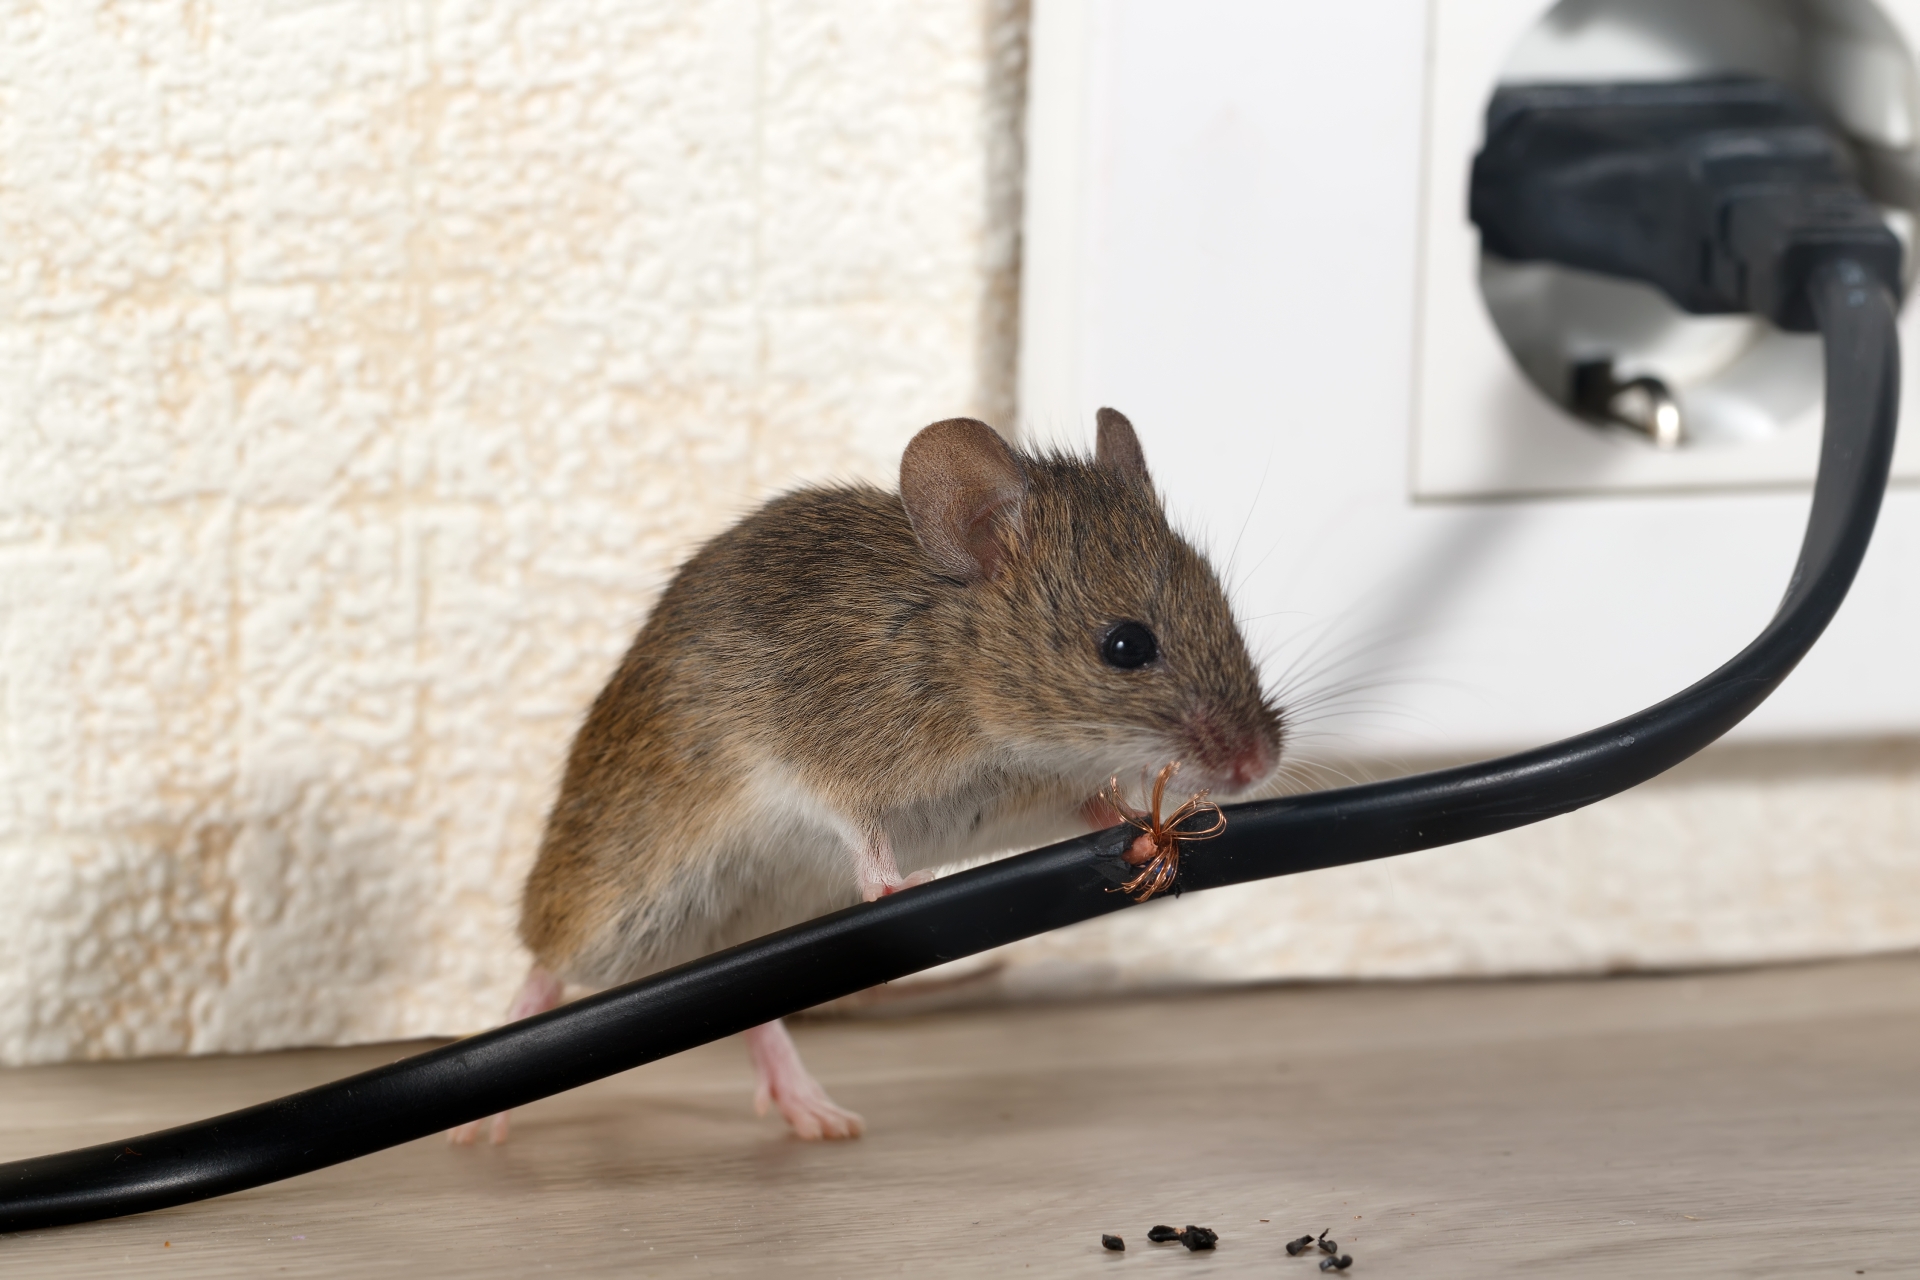 Mice Infestation, Pest Control in Shepperton, Upper Halliford, TW17. Call Now 020 8166 9746